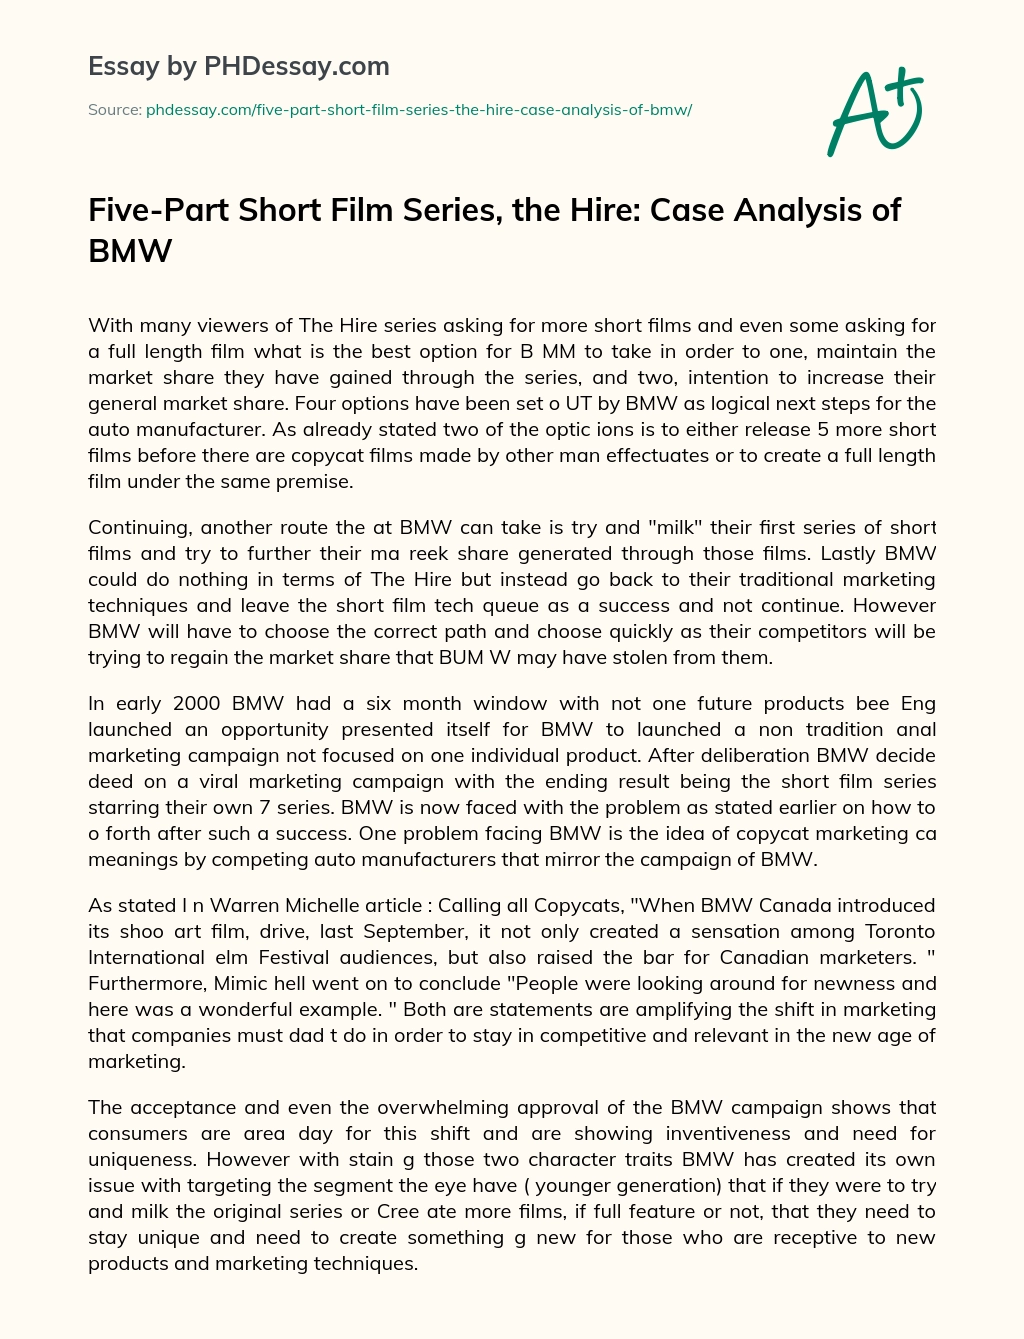 Five-Part Short Film Series, the Hire: Case Analysis of BMW essay